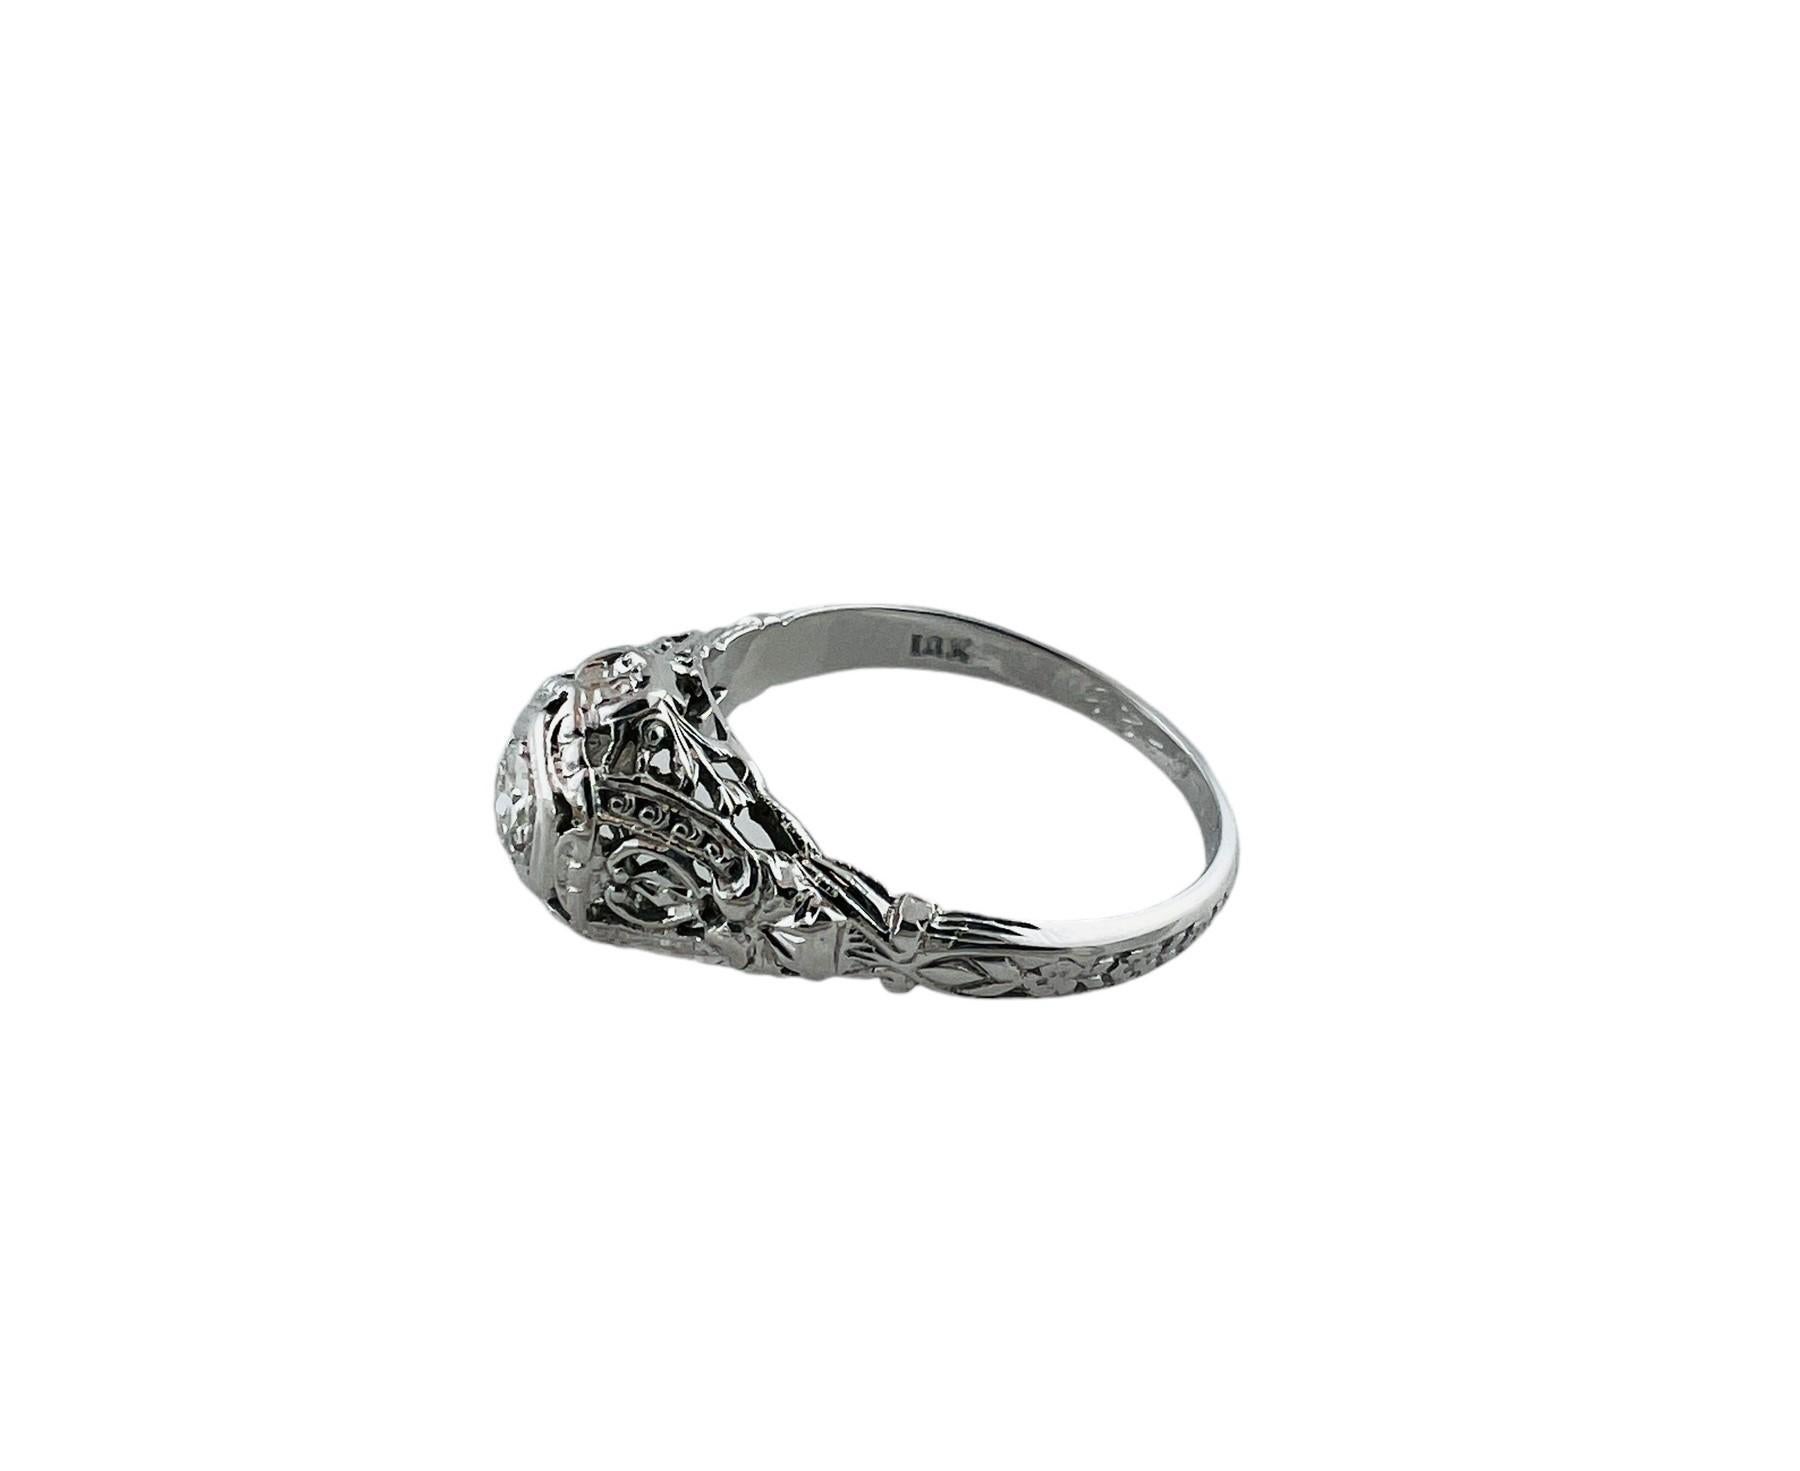 1928 18K White Gold Diamond Filigree Engagement Ring

This beautiful filigree style engagement ring is set in 18K white gold

Inside the ring is engraved W.J.D to ELL 10-6-28

Diamond is a round brilliant stone approx. 0.20 cts

Diamond clarity -